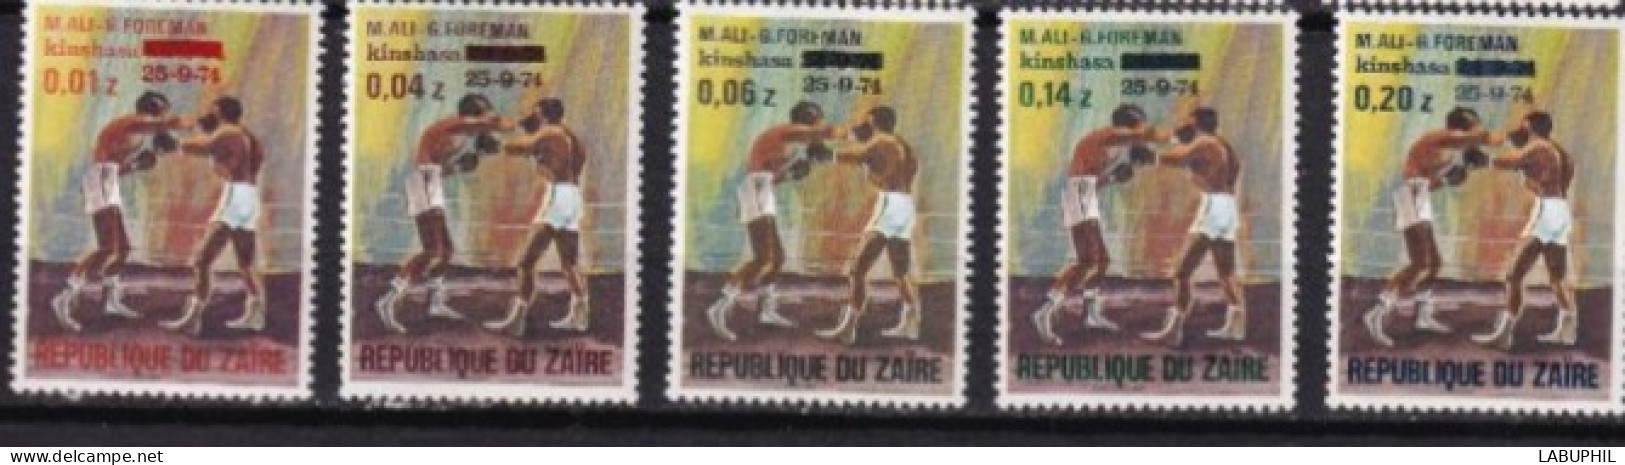 ZAIRE MNH ** 1974 Surcharge - Unused Stamps